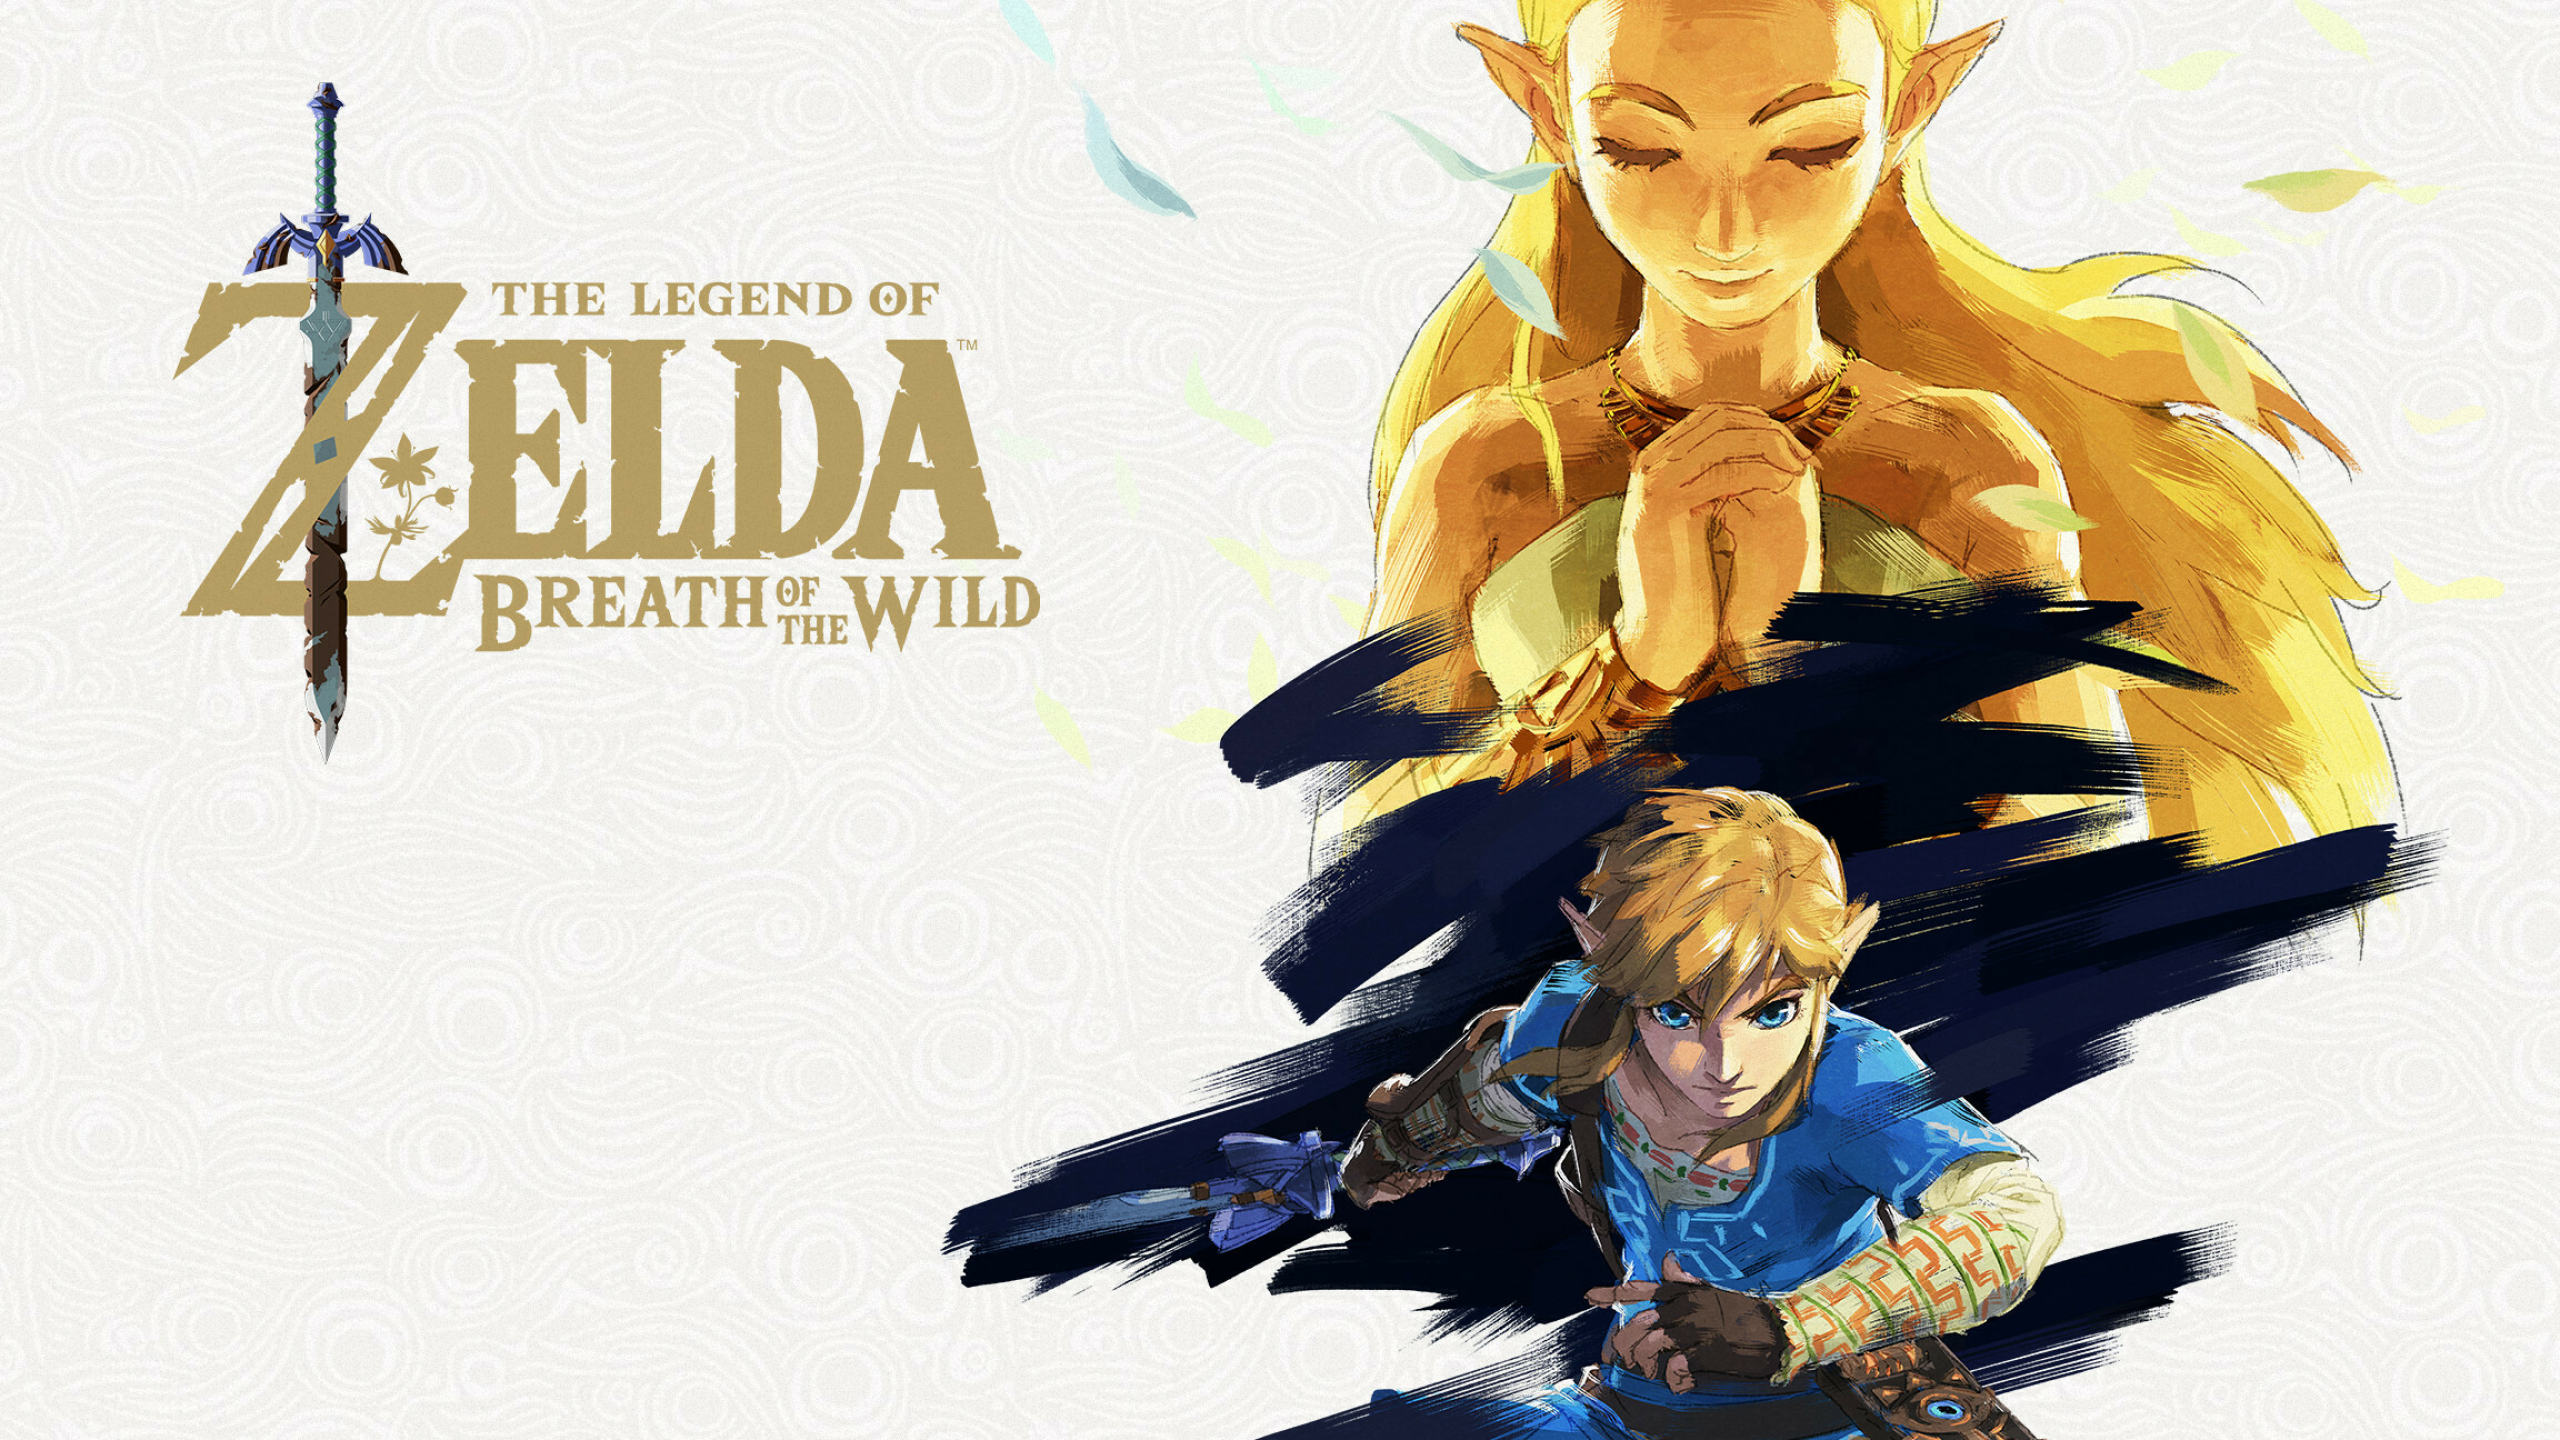 The Legend of Zelda: Breath of the Wild, Takes place at the end of the Zelda timeline. 2560x1440 HD Wallpaper.